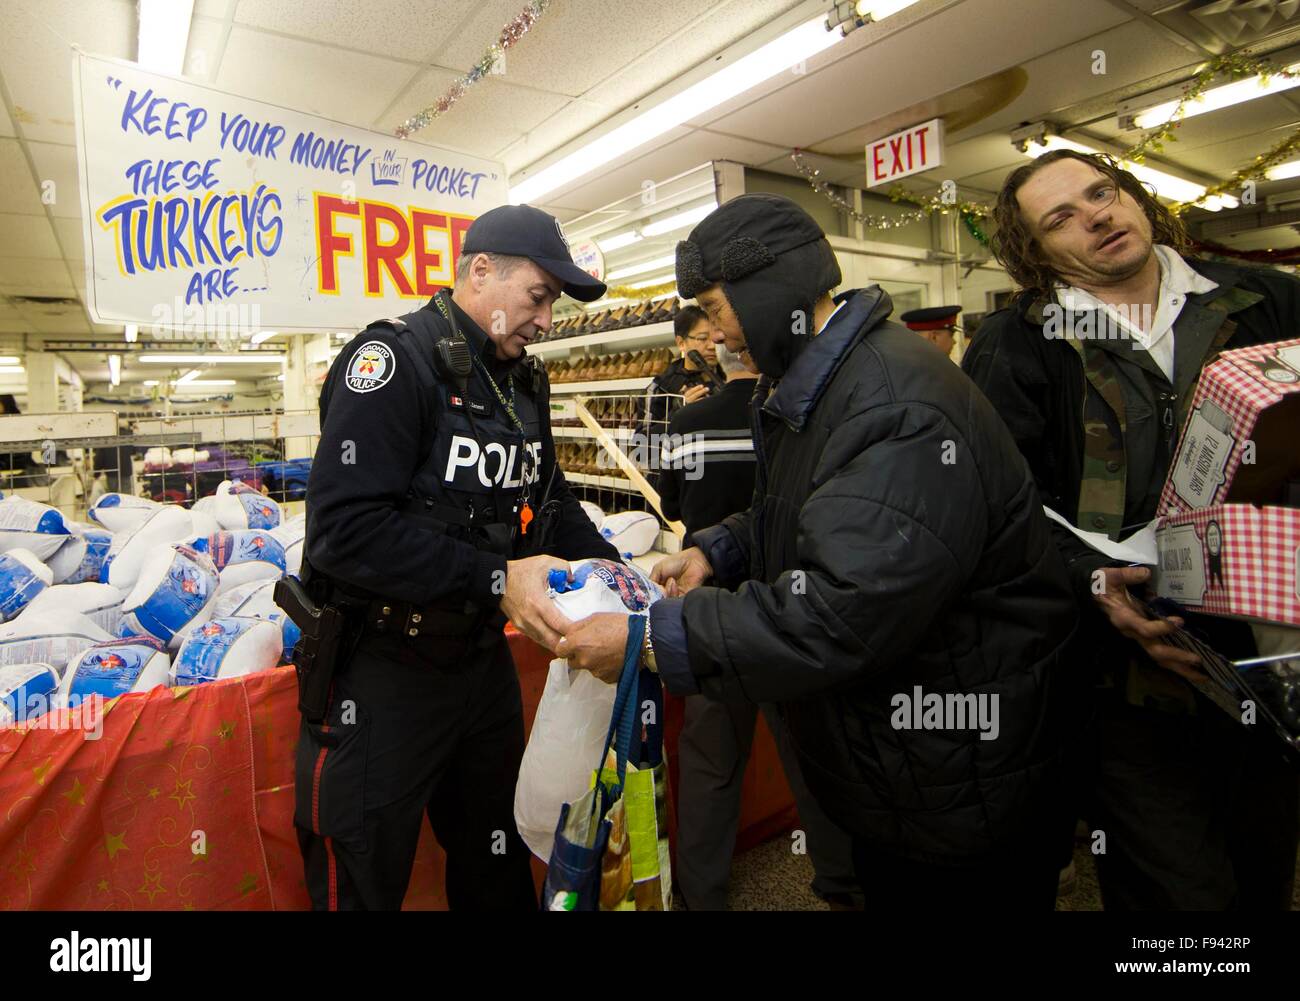 Toronto, Canada. 13th Dec, 2015. People receive free turkeys at a local store called Honest Ed's during the store's 28th annual Christmas time turkey giveaway event in Toronto, Canada, Dec. 13, 2015. In the last giveaway of this annual event, hundreds of people around the city lined up to get one of about 1,300 free turkeys and fruitcakes from the store on Sunday. © Zou Zheng/Xinhua/Alamy Live News Stock Photo